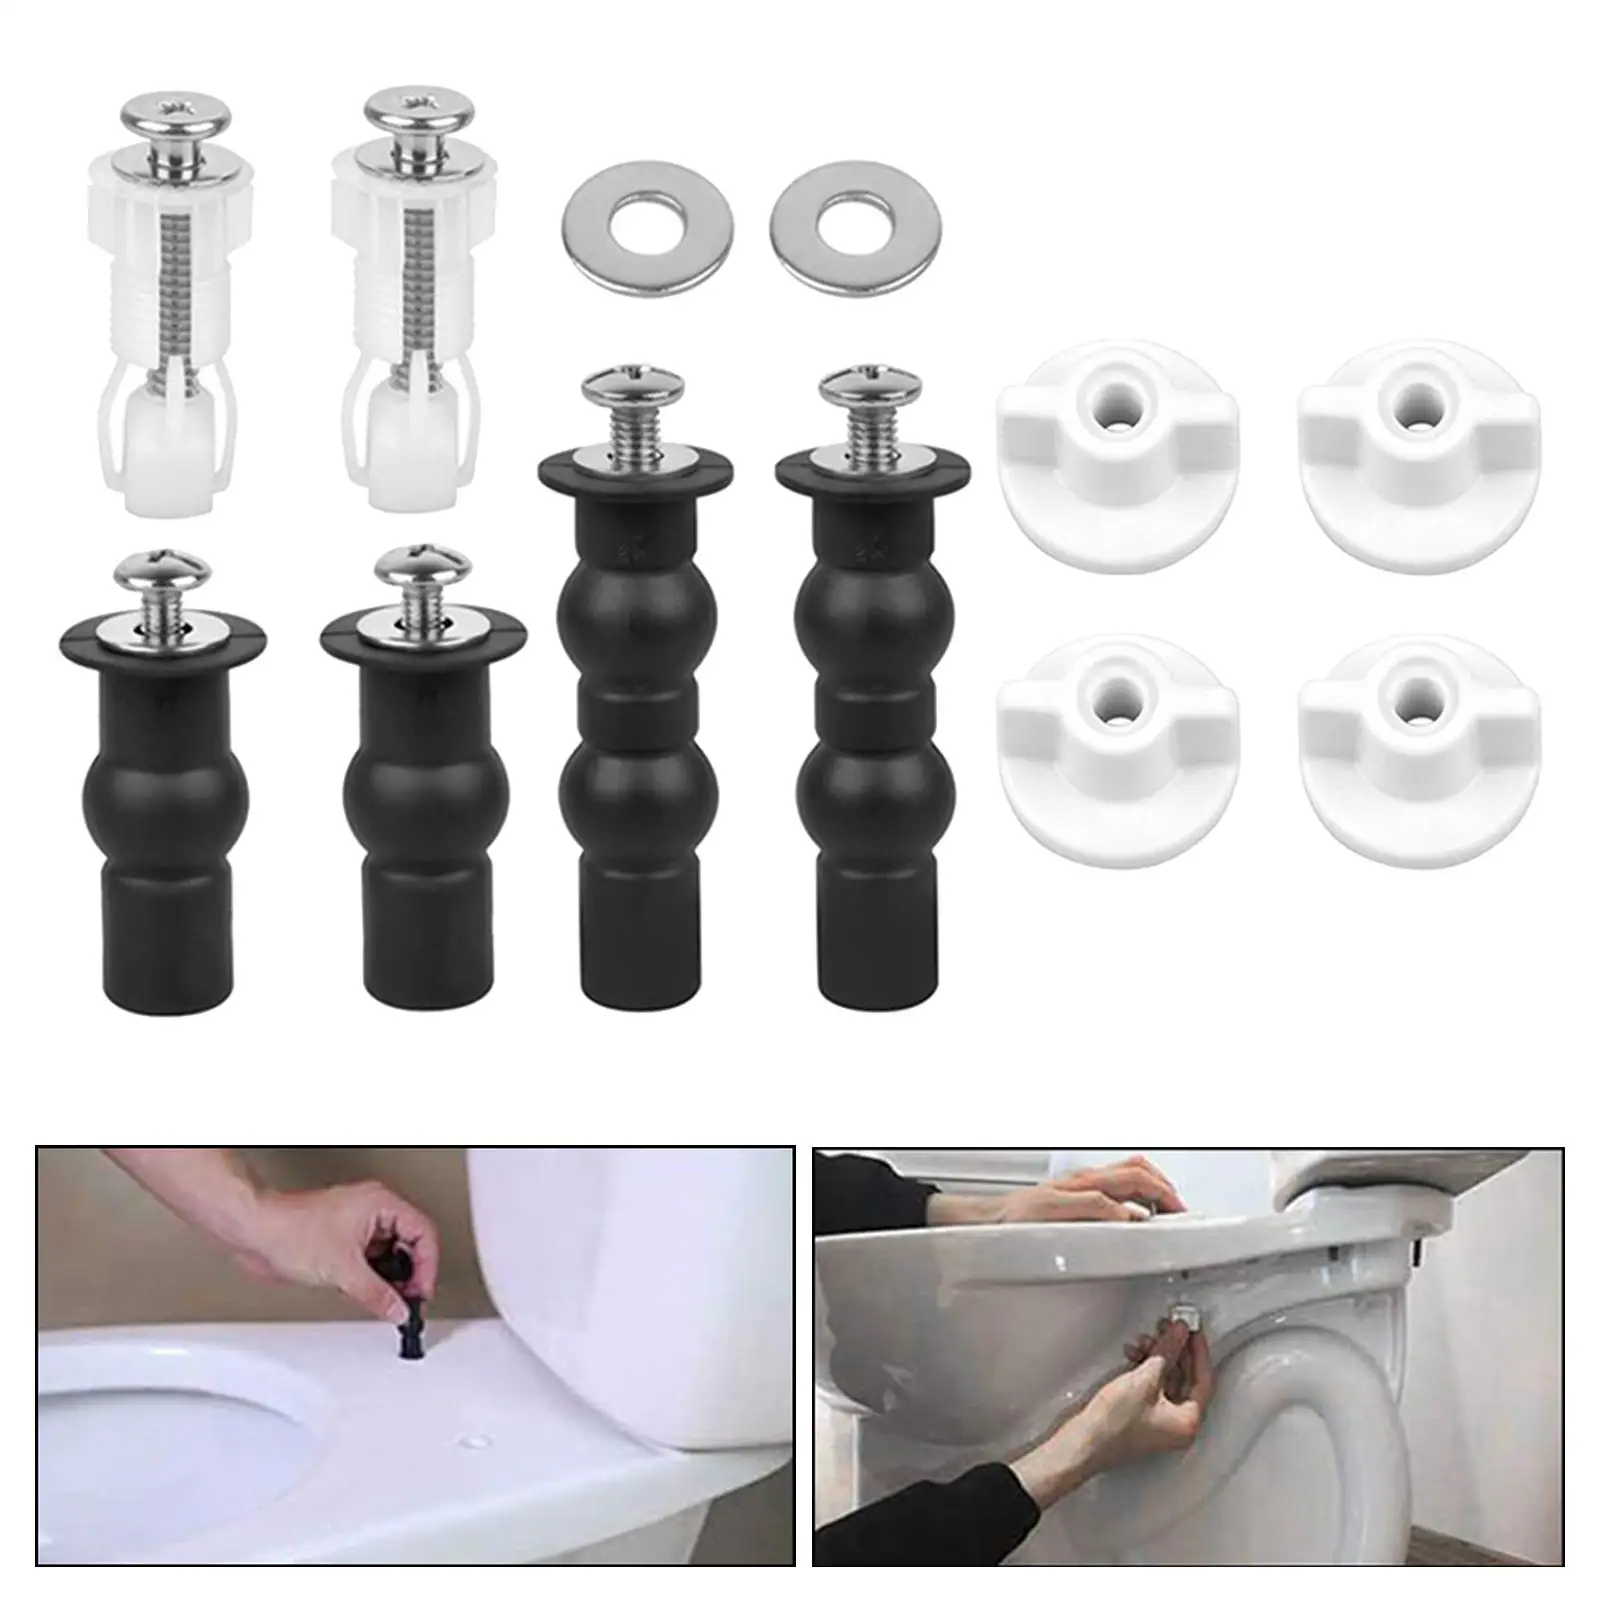 Universal Screw Toilet Toilet Seat Hinges Screws Toilet Cover Accessories Replacement Rubber Spreader Bolts 304 Stainless Steel